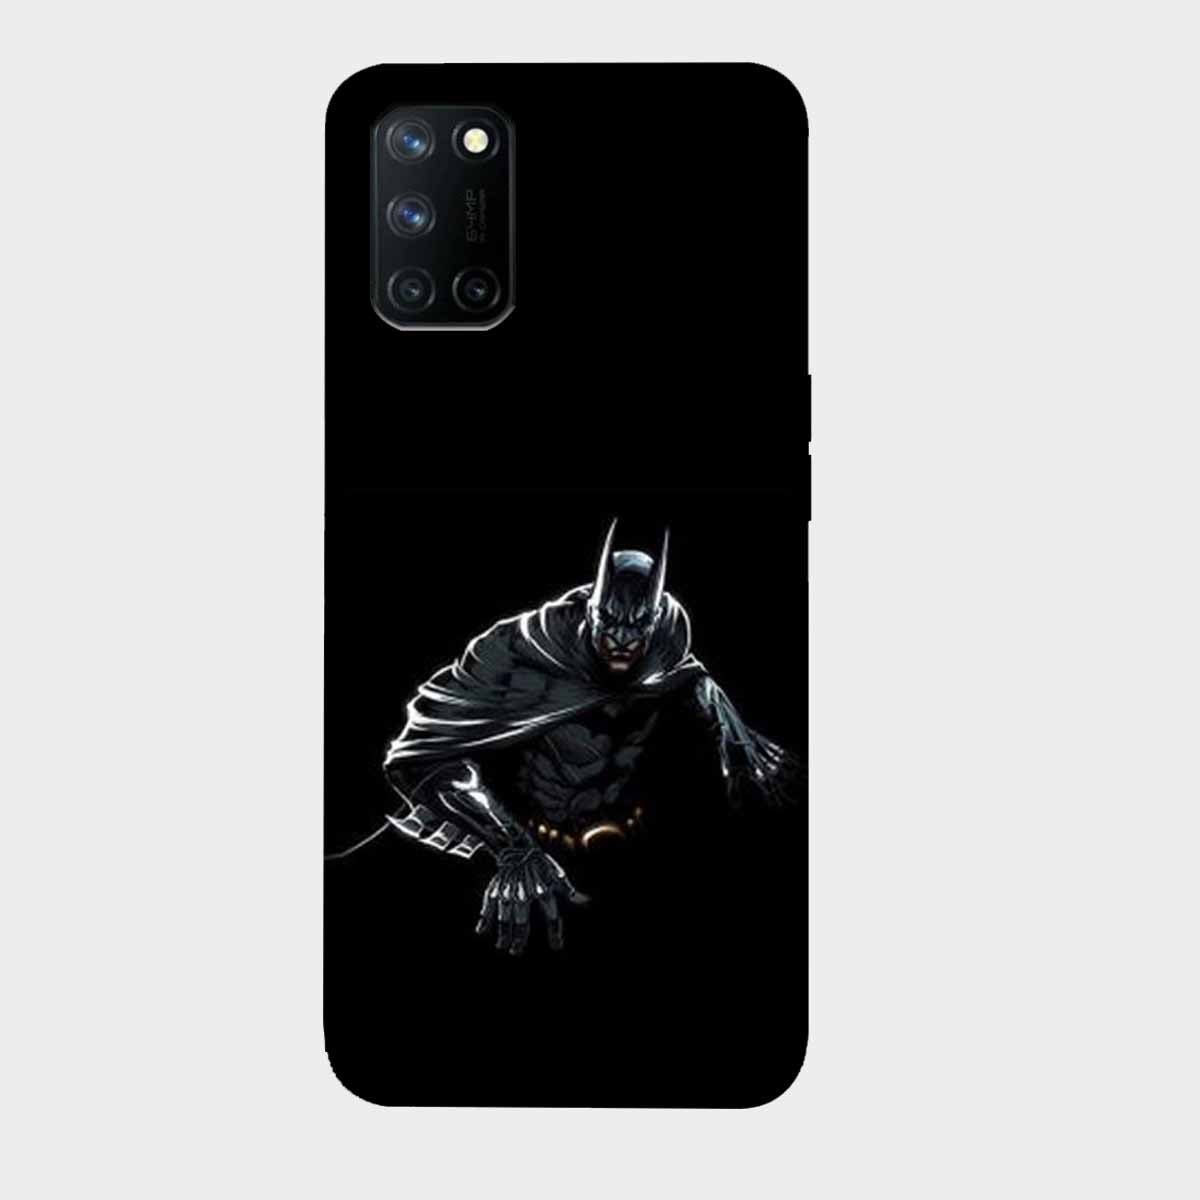 Batman - Ready for Action - Mobile Phone Cover - Hard Case